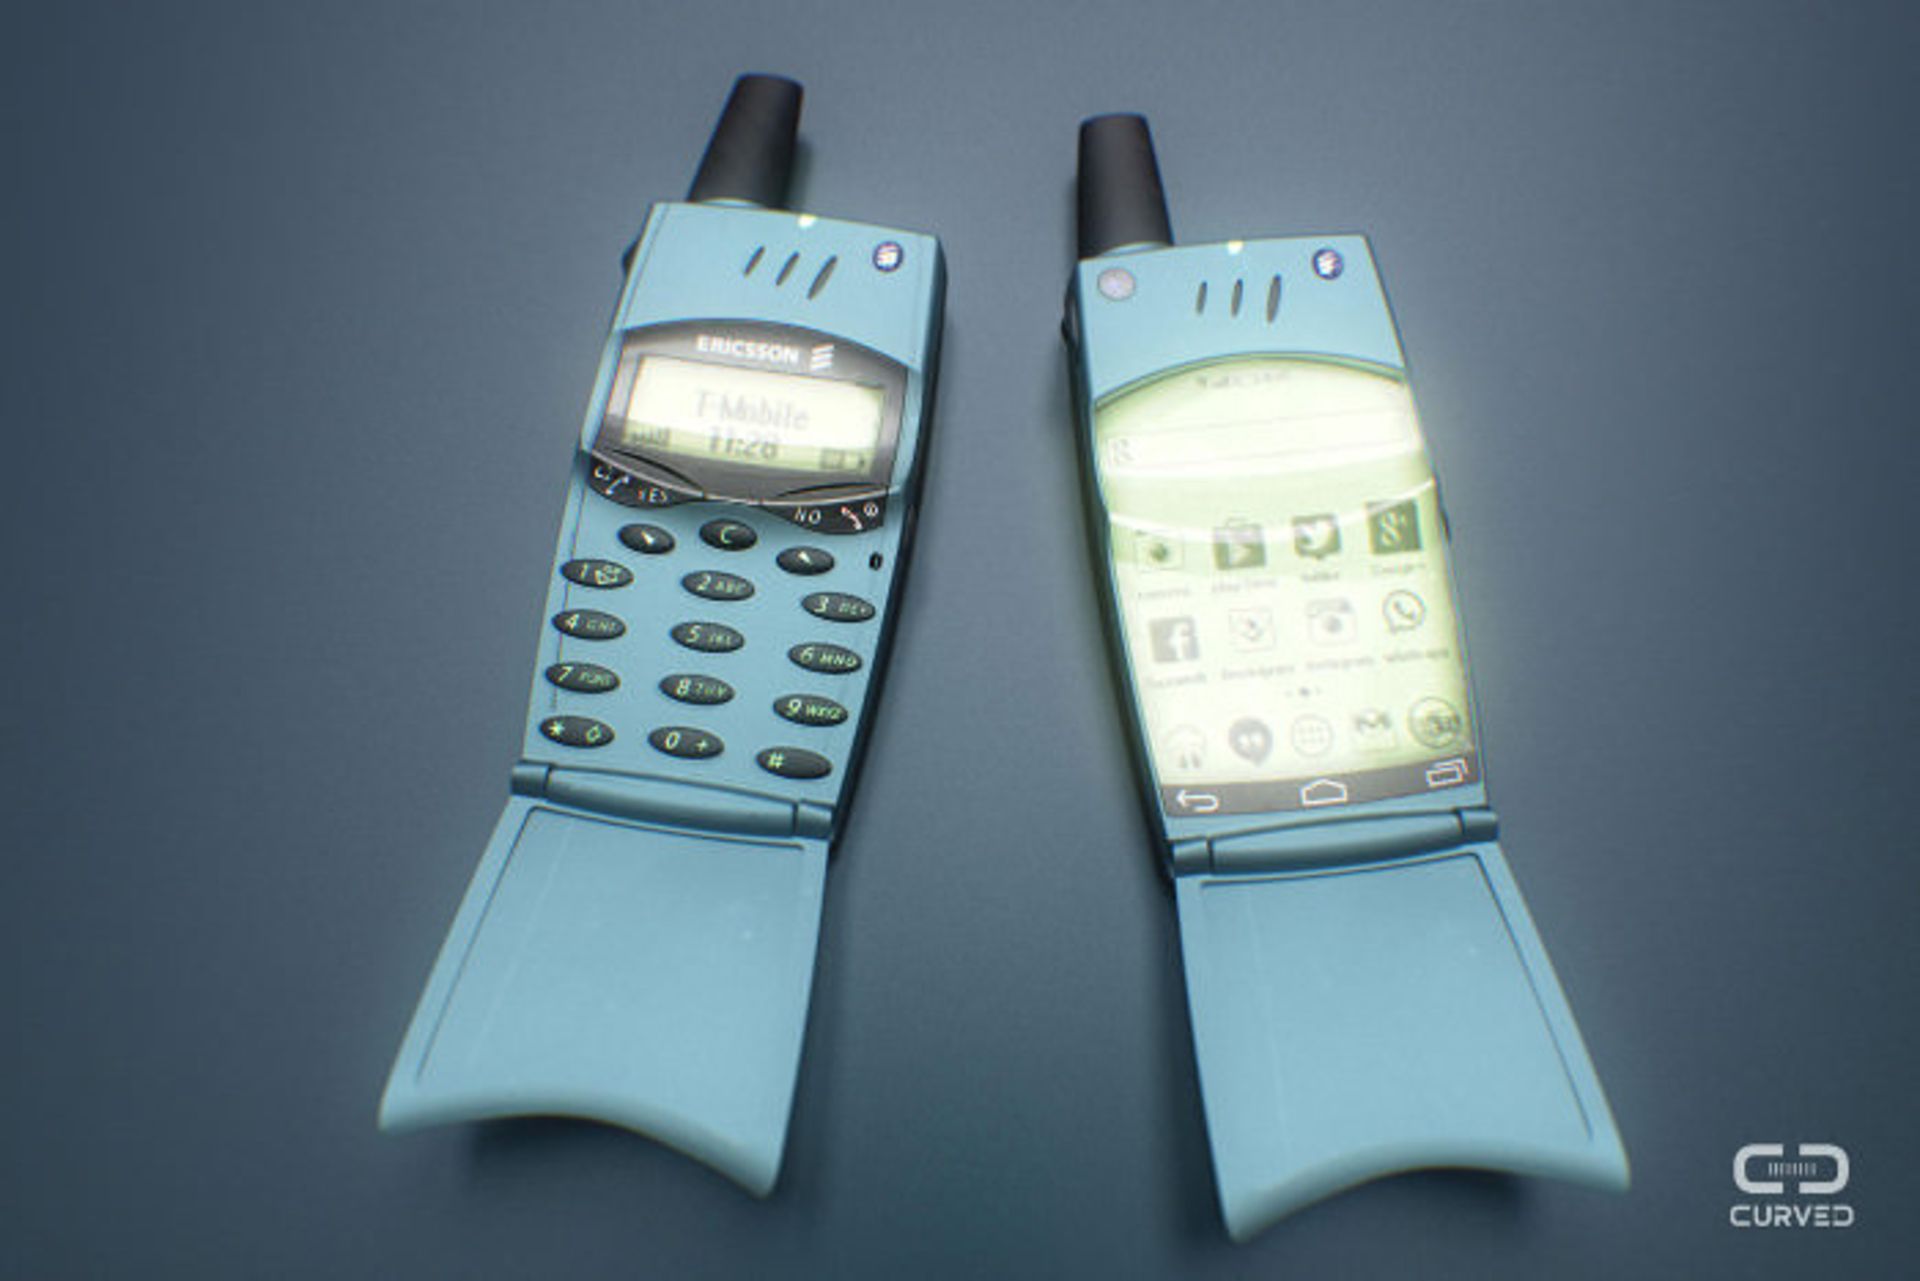 What-if-featurephones-were-smart 14